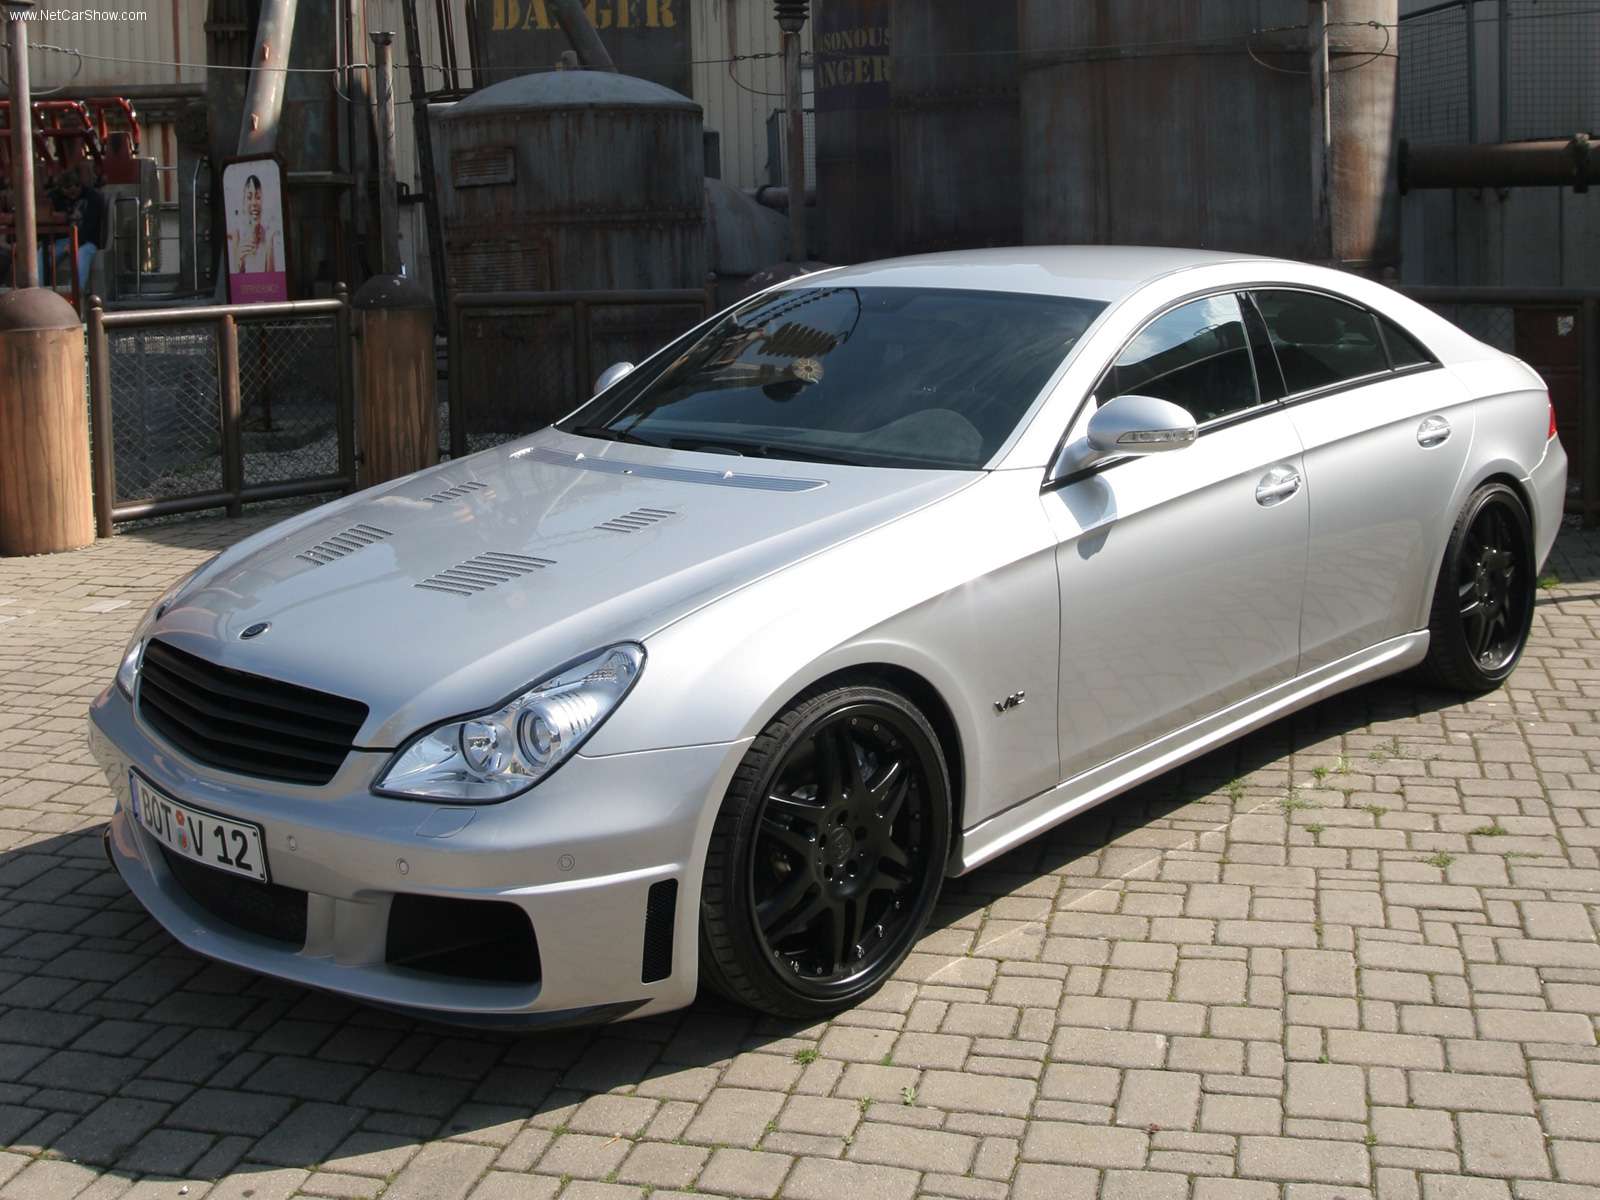 Brabus CLS V12 S Rocket photos PhotoGallery with 5 pics